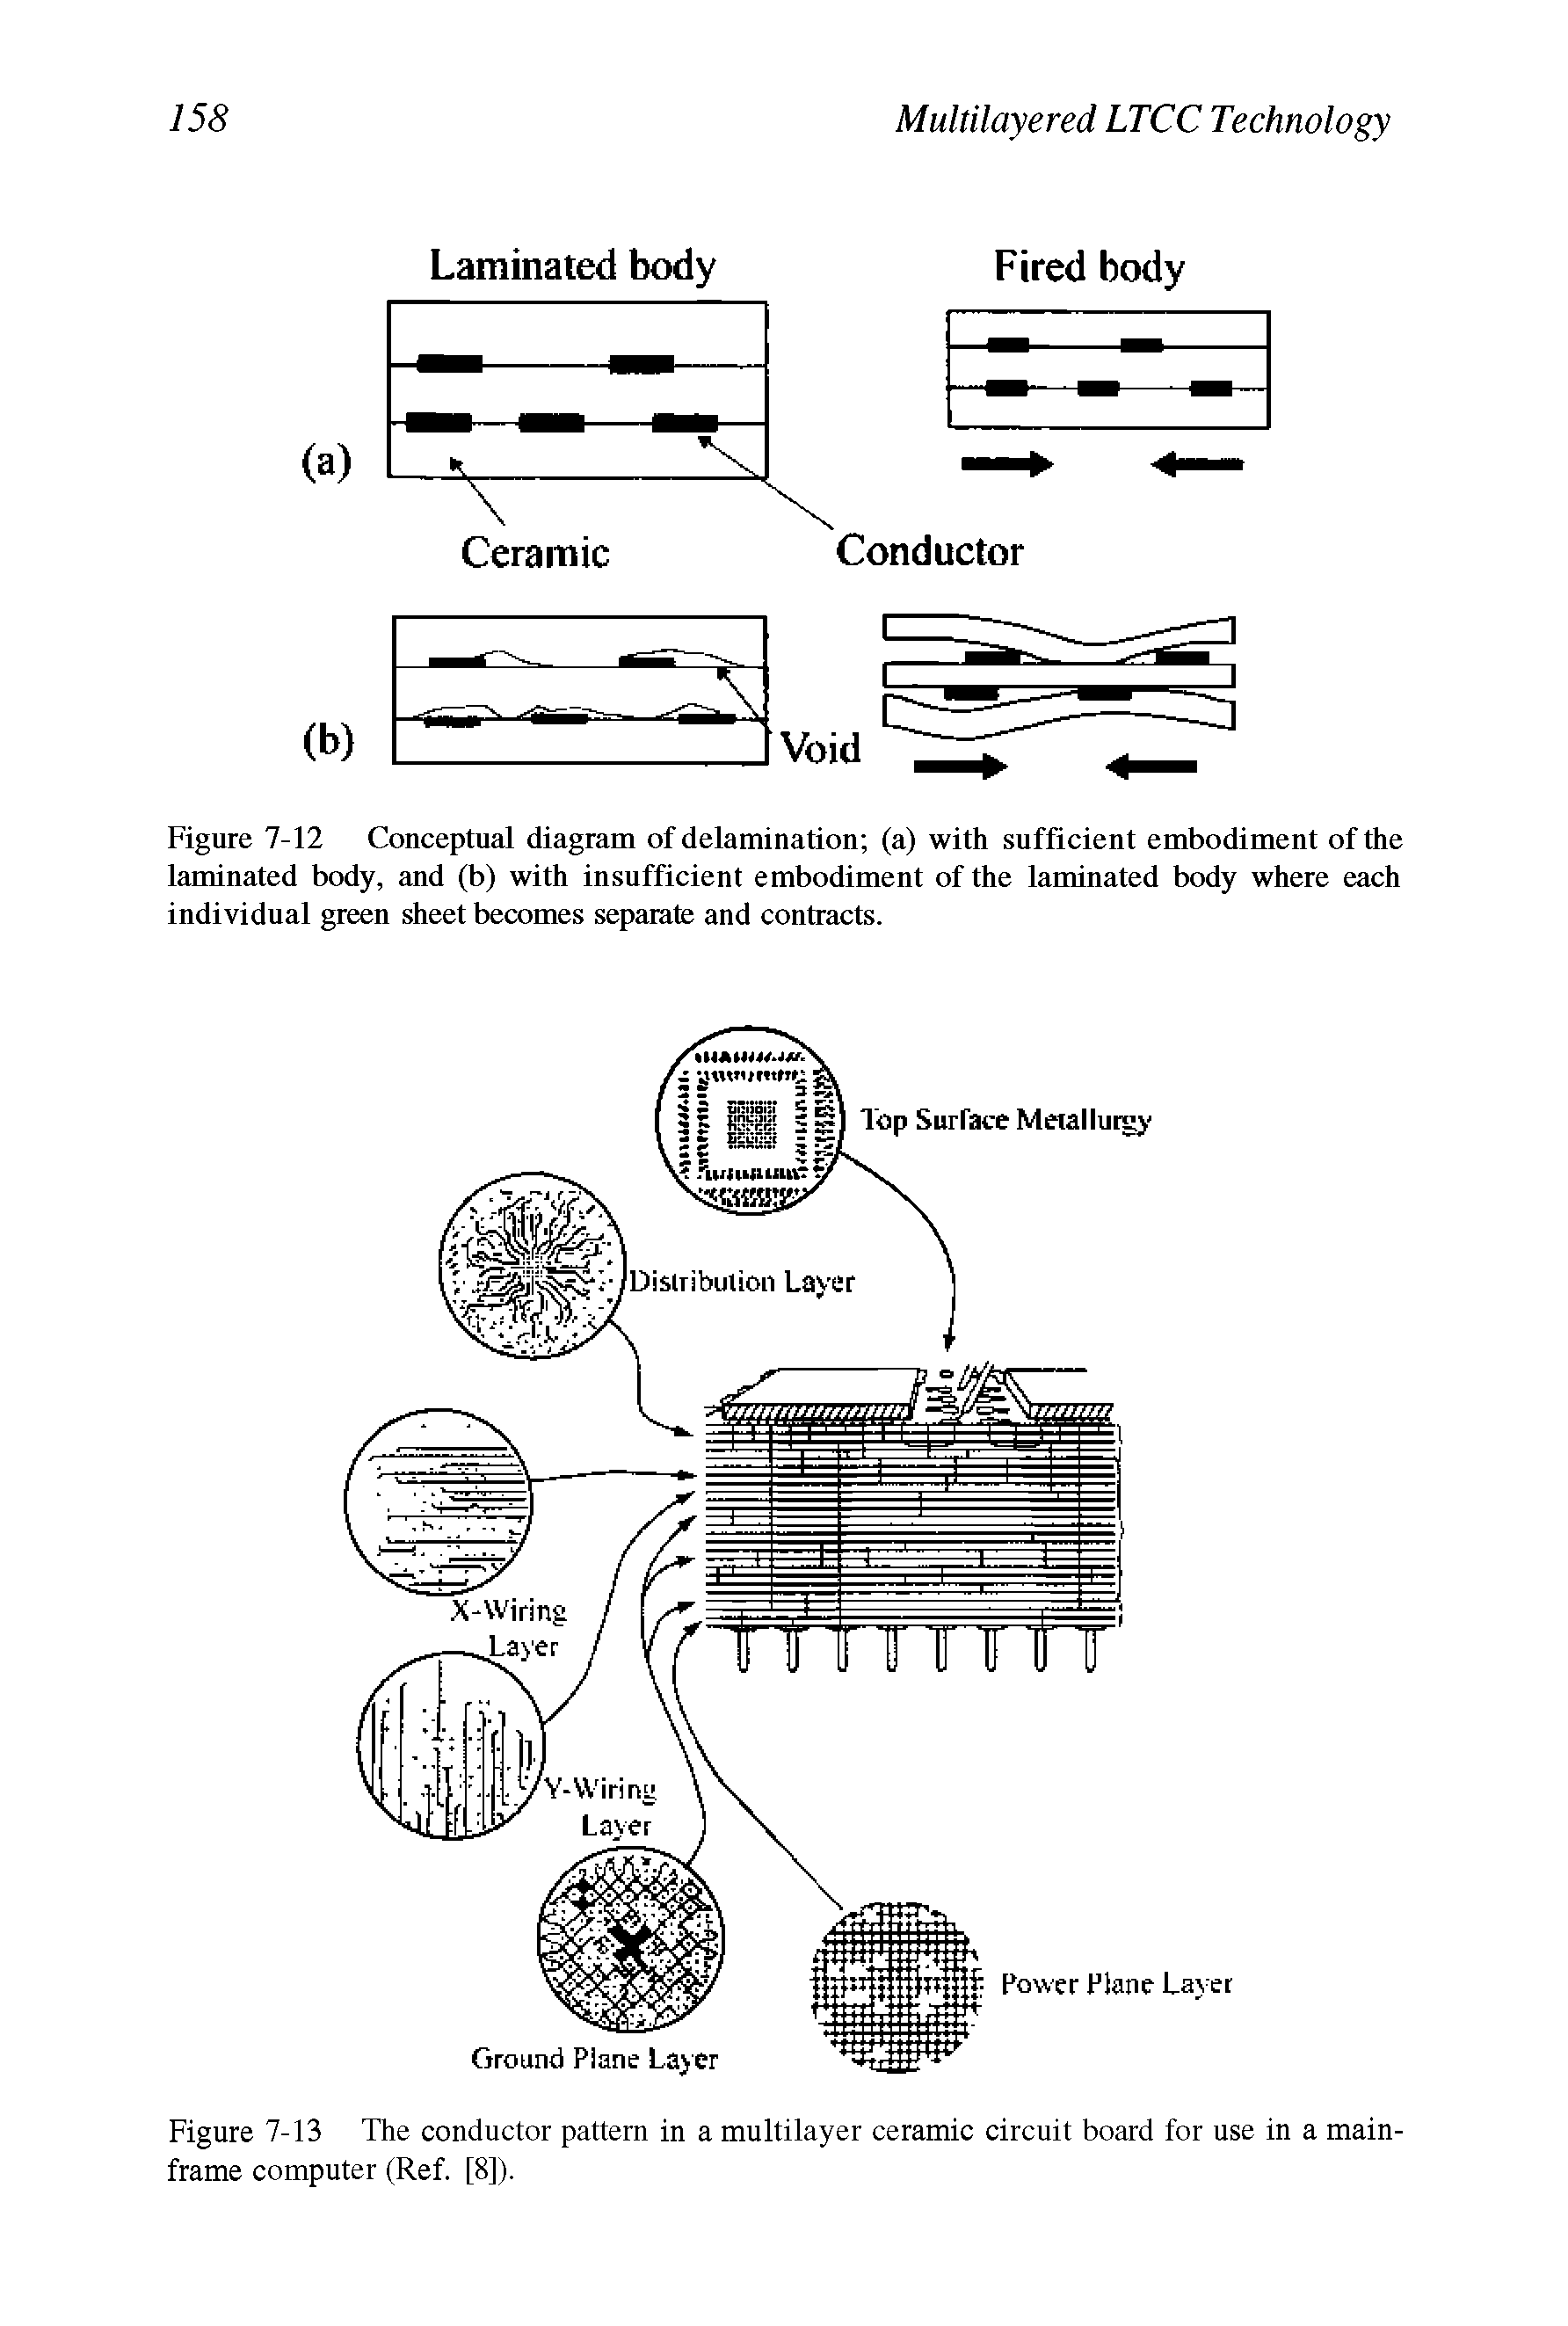 Figure 7-13 The conductor pattern in a multilayer ceramic circuit board for use in a mainframe computer (Ref. [8]).